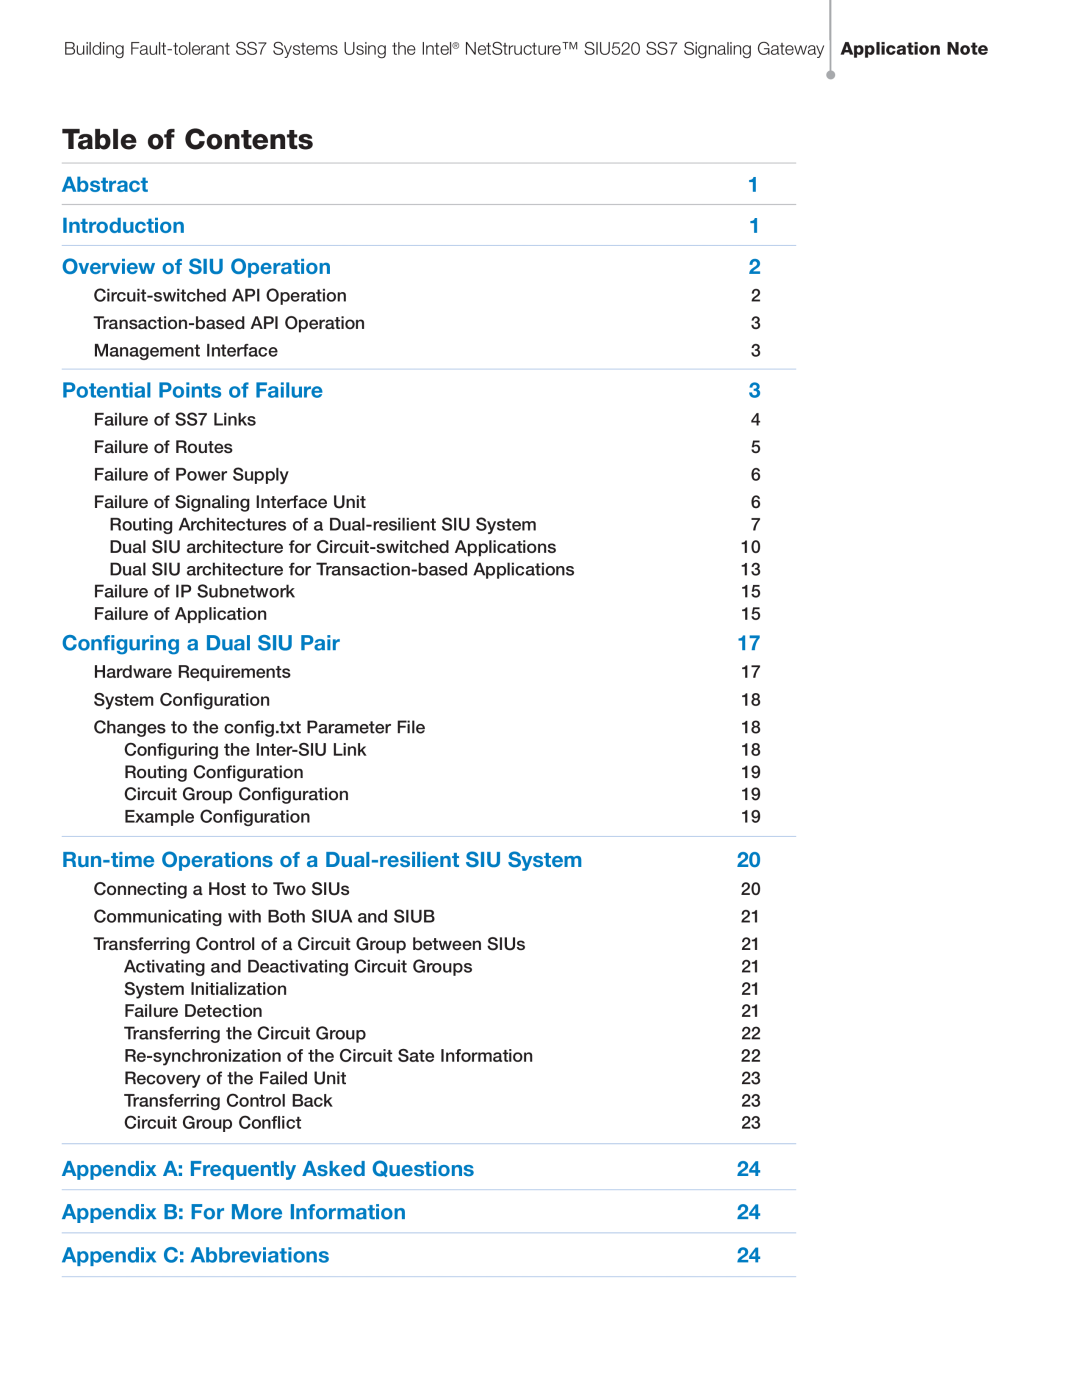 Intel SIU520 SS7 manual Table of Contents, Abstract, Introduction, Overview of SIU Operation, Potential Points of Failure 